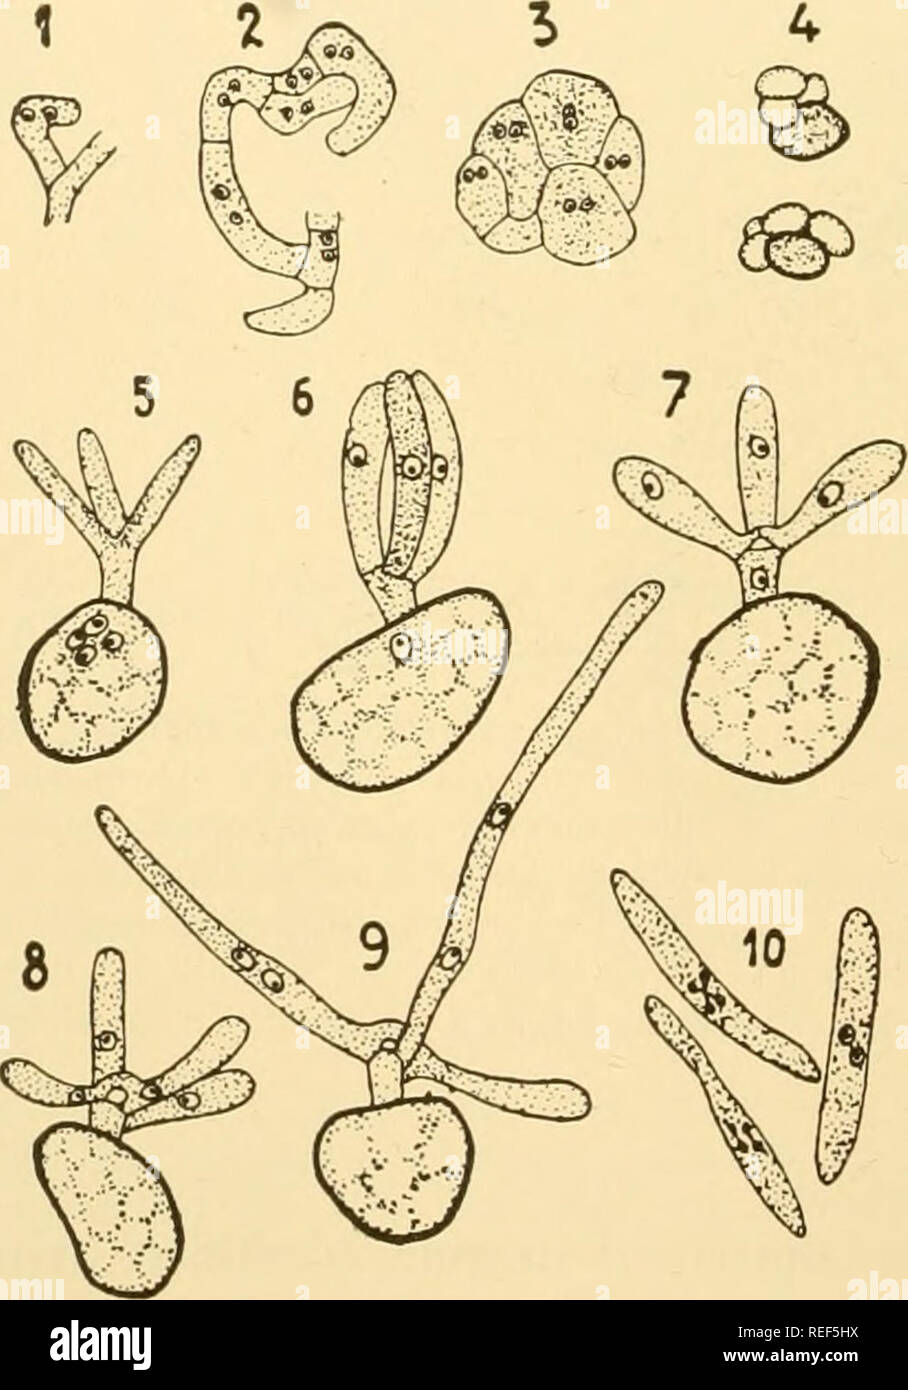 . Comparative morphology of Fungi. Fungi. Fig. 401.—Neovossia Moliniae. 1. Tuft of hyphae with filamentous conidia. 2. Fila- mentous conidia germinating to falcate conidia. 3. Young smut spores. 4, 5. Germina- tion of smut spores. (1, 2 X 270; 3 X 330; 4, 5 X 240; after Brefeld, 1895.) develop to very slender mycelia which, in case the germination occurs in water, pour out their content into falcate conidia or, if the germination. Fig. 402.— Tuburcinia Ranunculi. 1 to 3. Development of a spore ball with fertile and sterile cells. 5 to 9. Germination of smut spores. Tuburcinia Violae. 10. Binuc Stock Photo